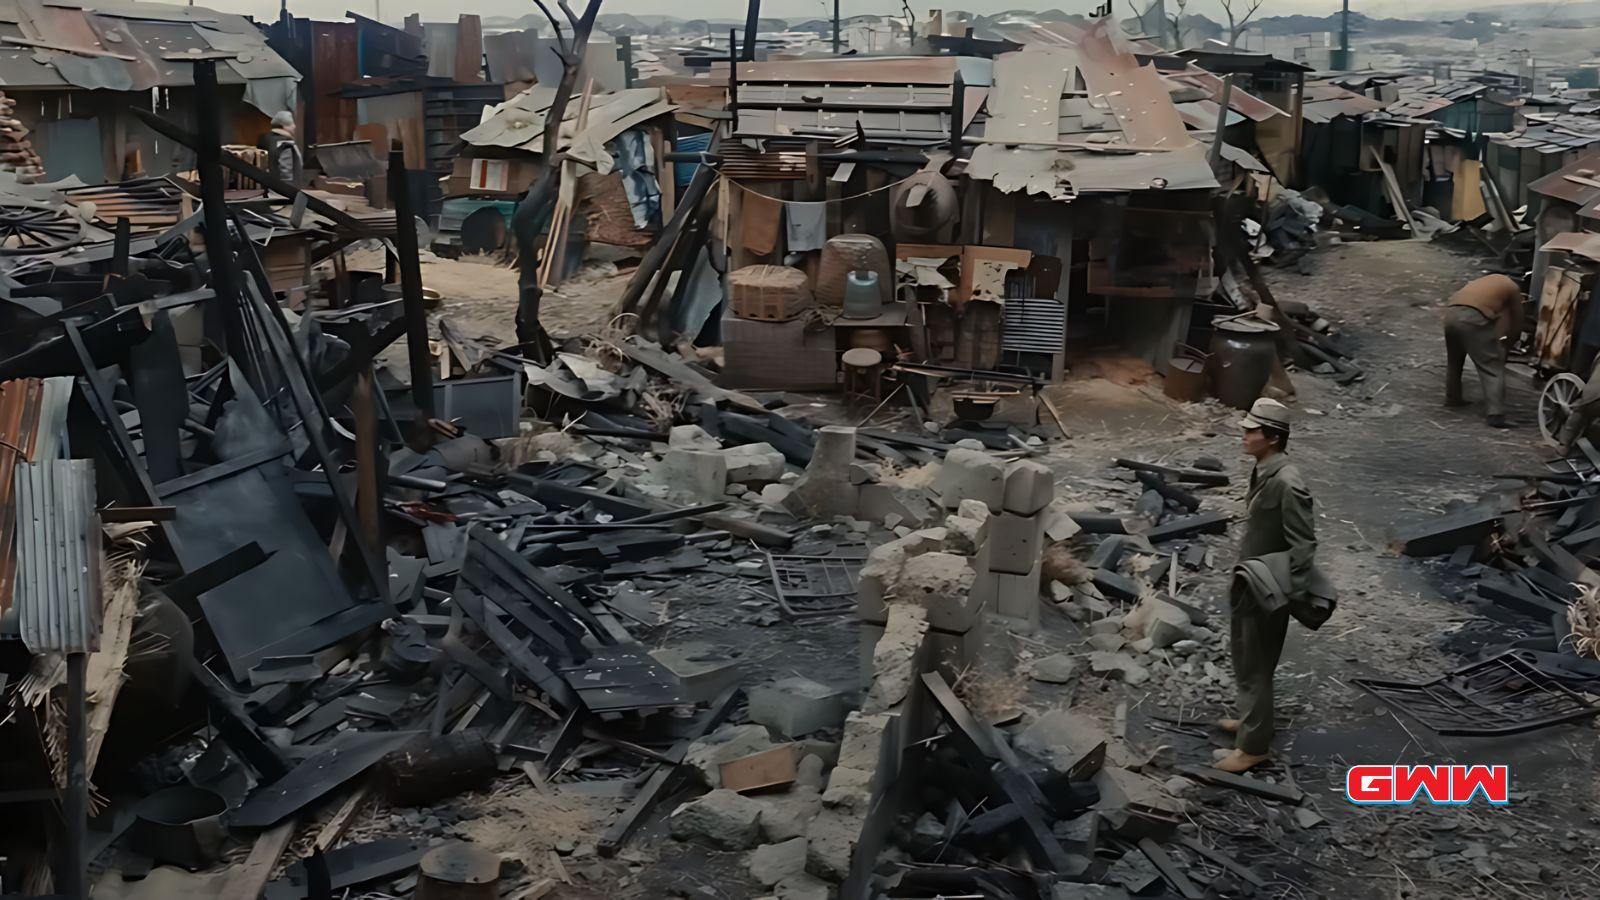 Koichi stands in a devastated village with ruins and debris.